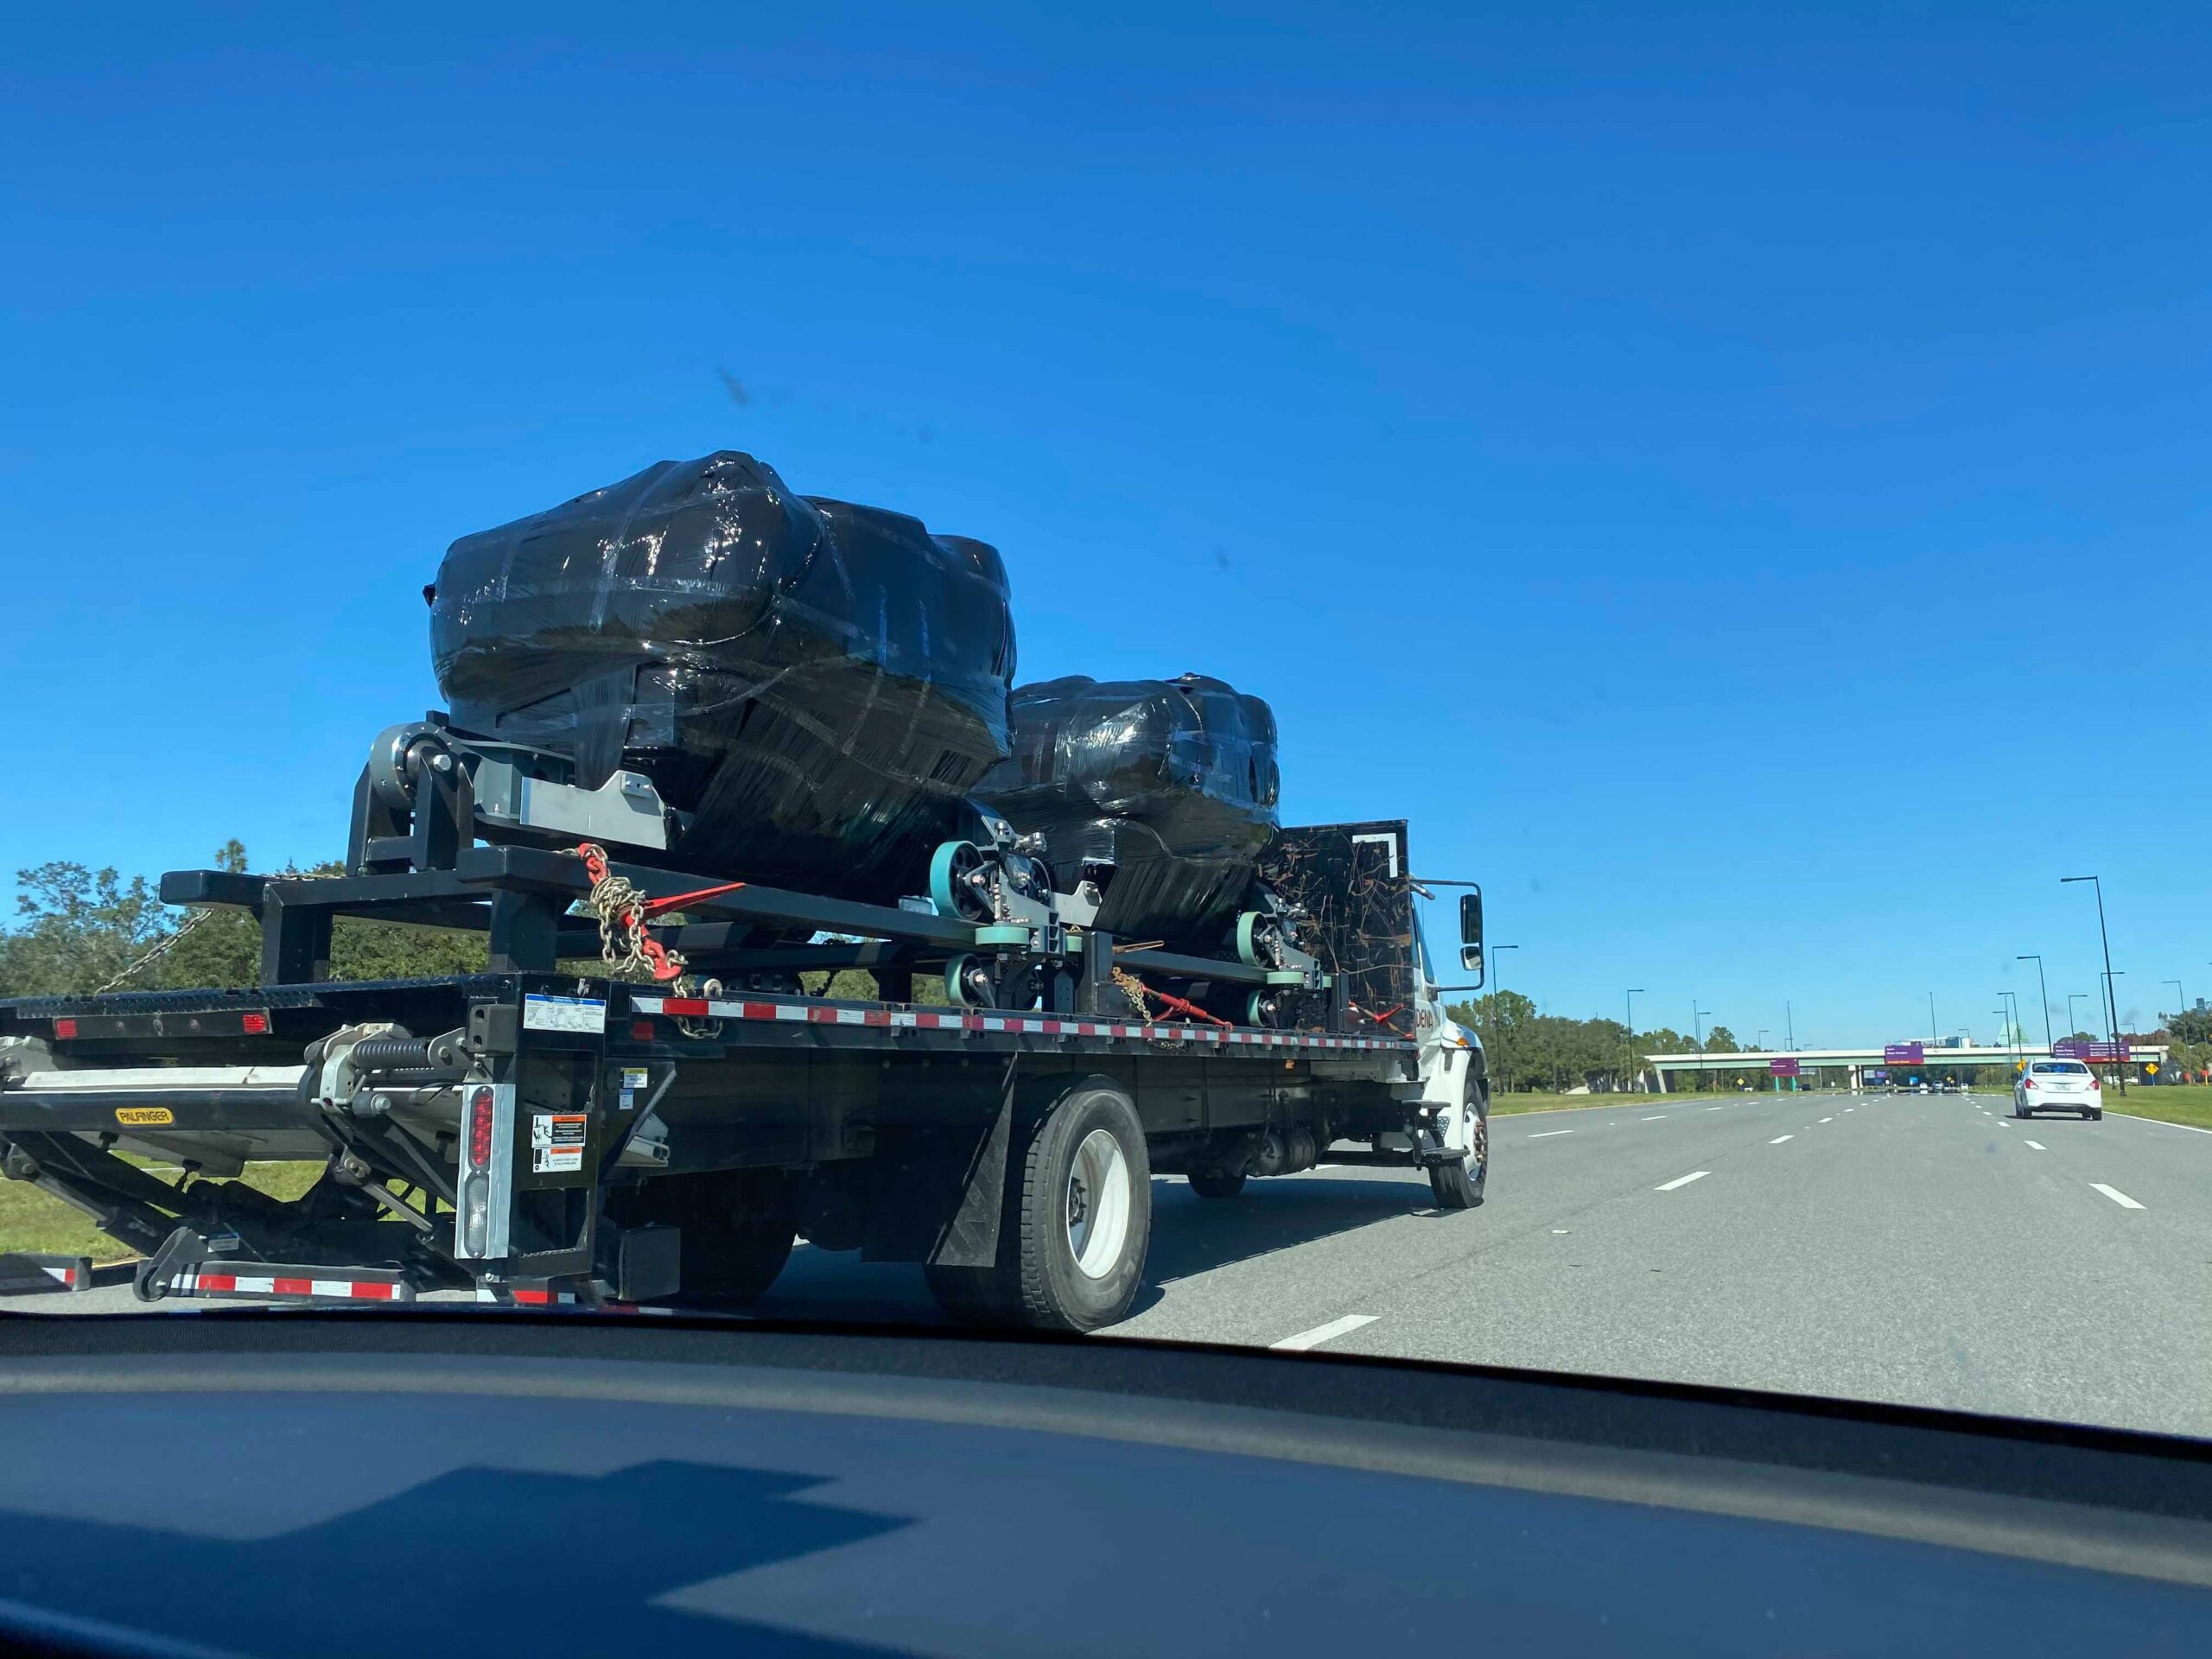 Guardian of the Galaxy Ride Vehicles Spotted on their Way to Epcot